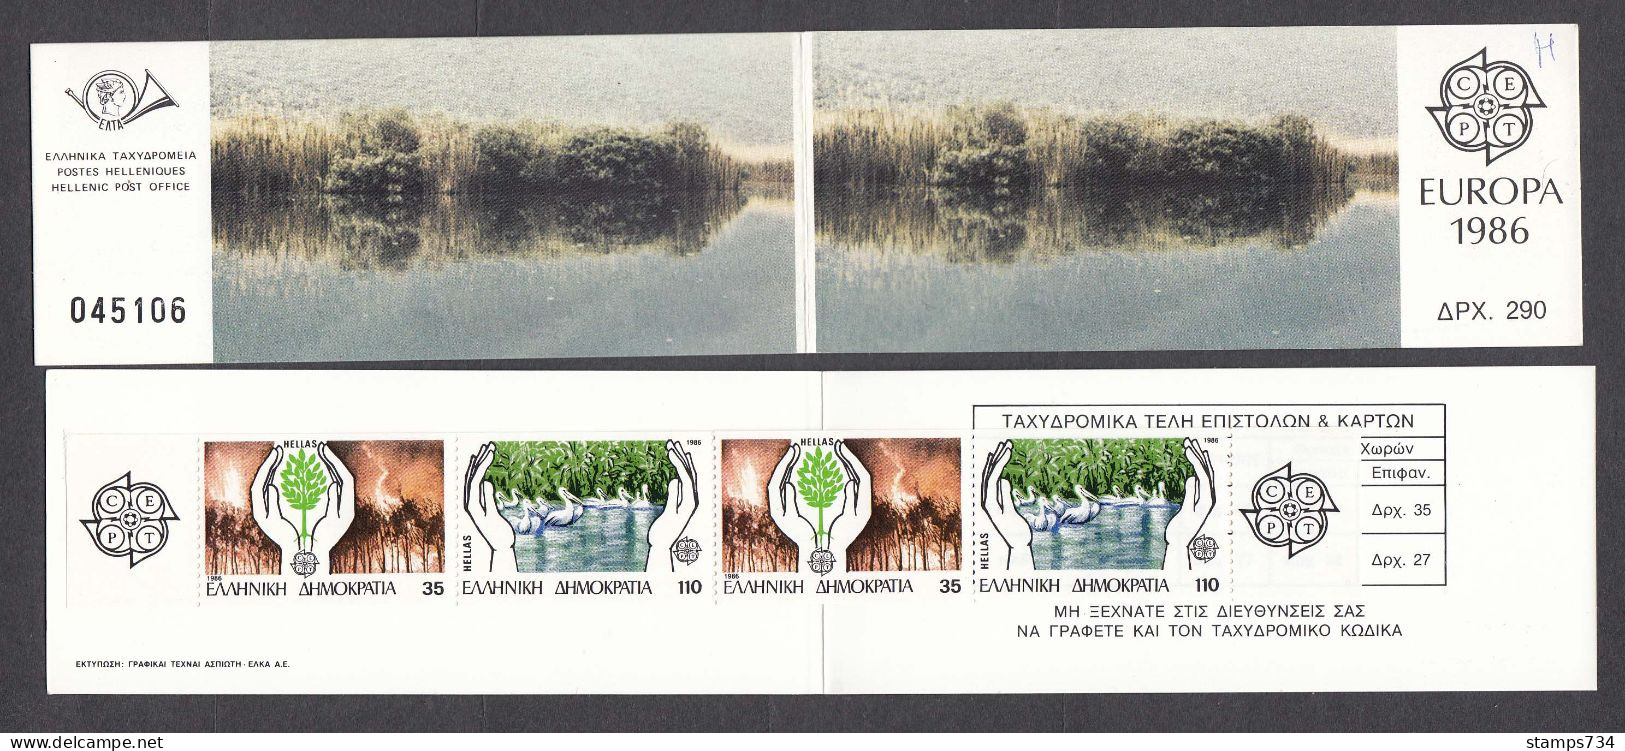 Grece 1986 - EUROPA(L'environnement) - Carnet (Michel MH 5), MNH** - Unused Stamps